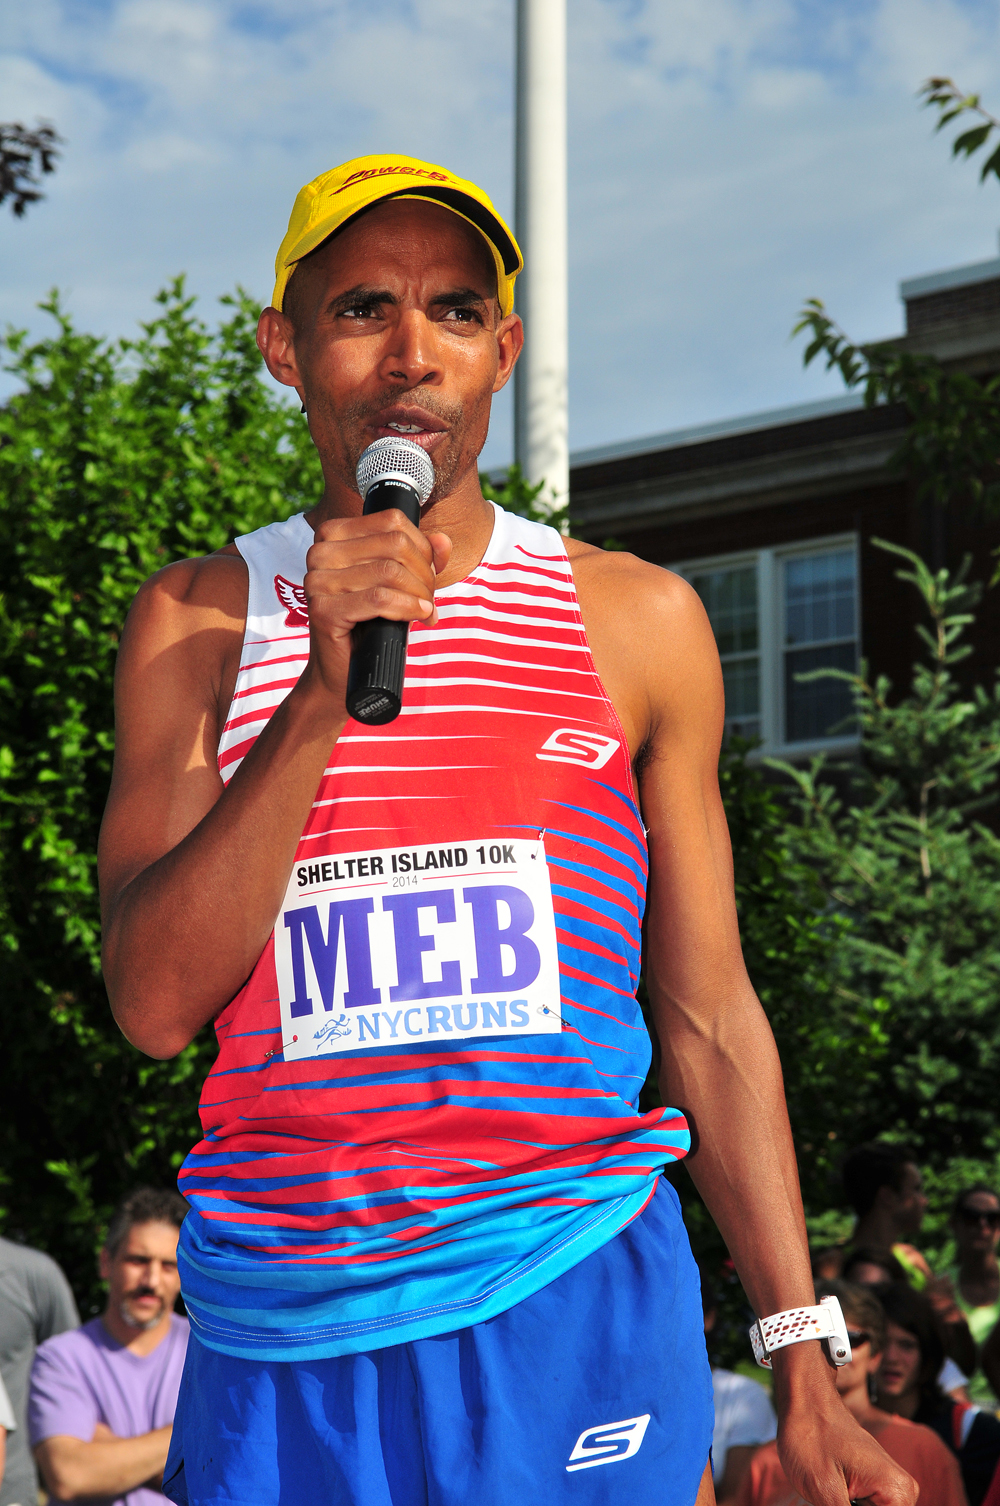 Boston Marathon winner Meb Keflezighi addressed the crowd at the start of the race. The 39-year-old lives in San Diego with his wife and three children. (Credit: Bill Landon)